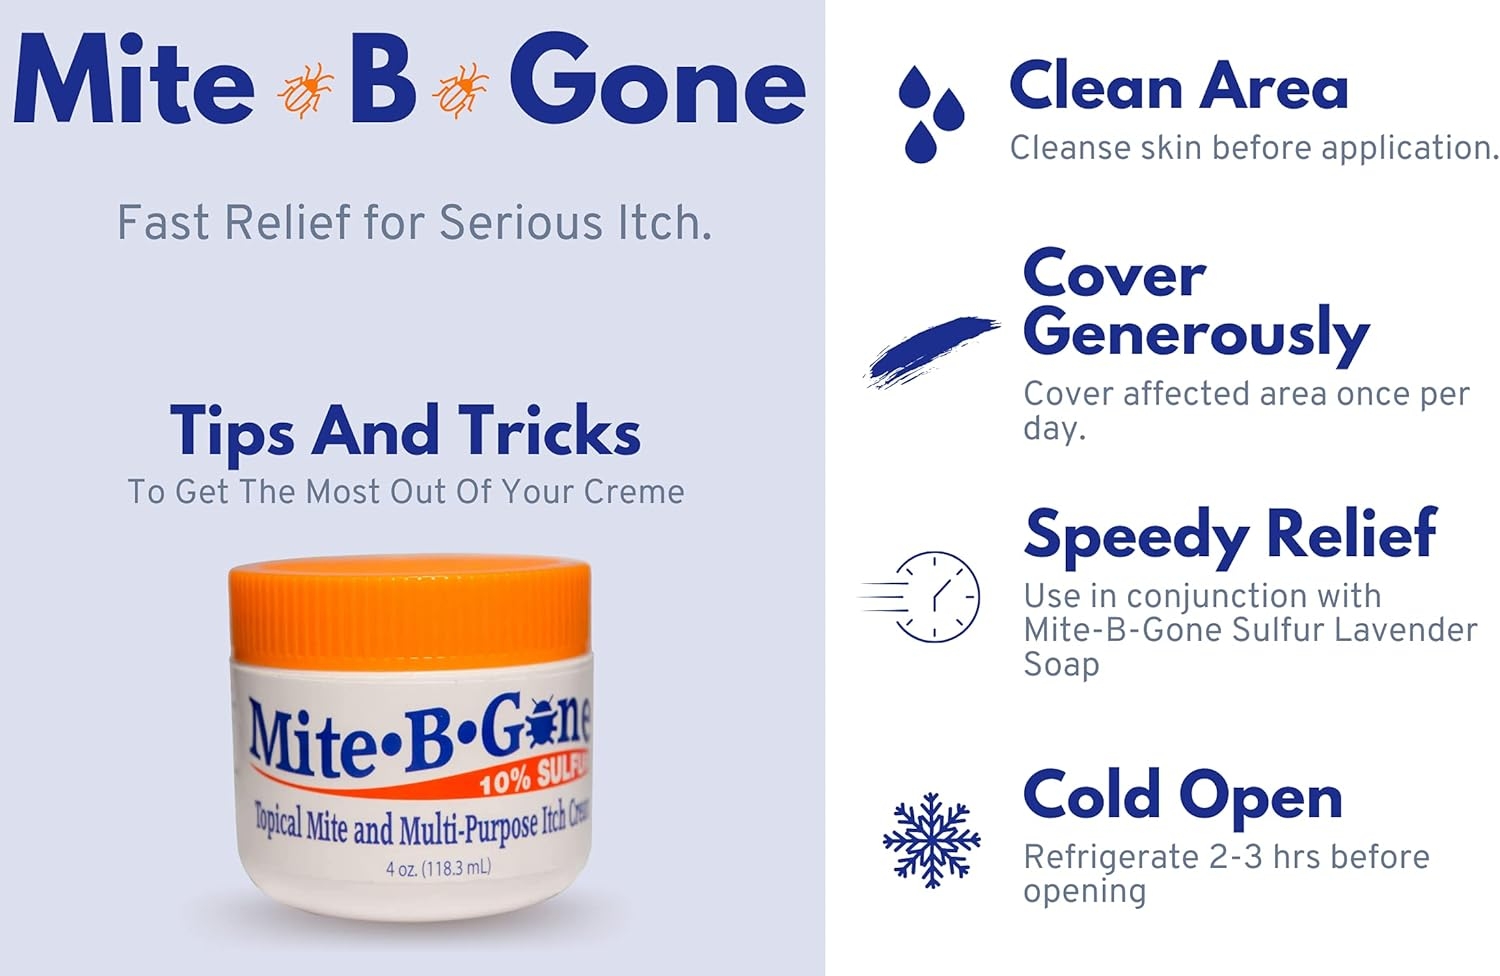 Mite-B-Gone 10% Sulfur Cream Itch Relief from Mites, Insect Bites, Acne, and Fungus (2oz) Fast and Effective Relief for All Mites with an All-Natural Blend of Anti-Inflammatory Ingredients